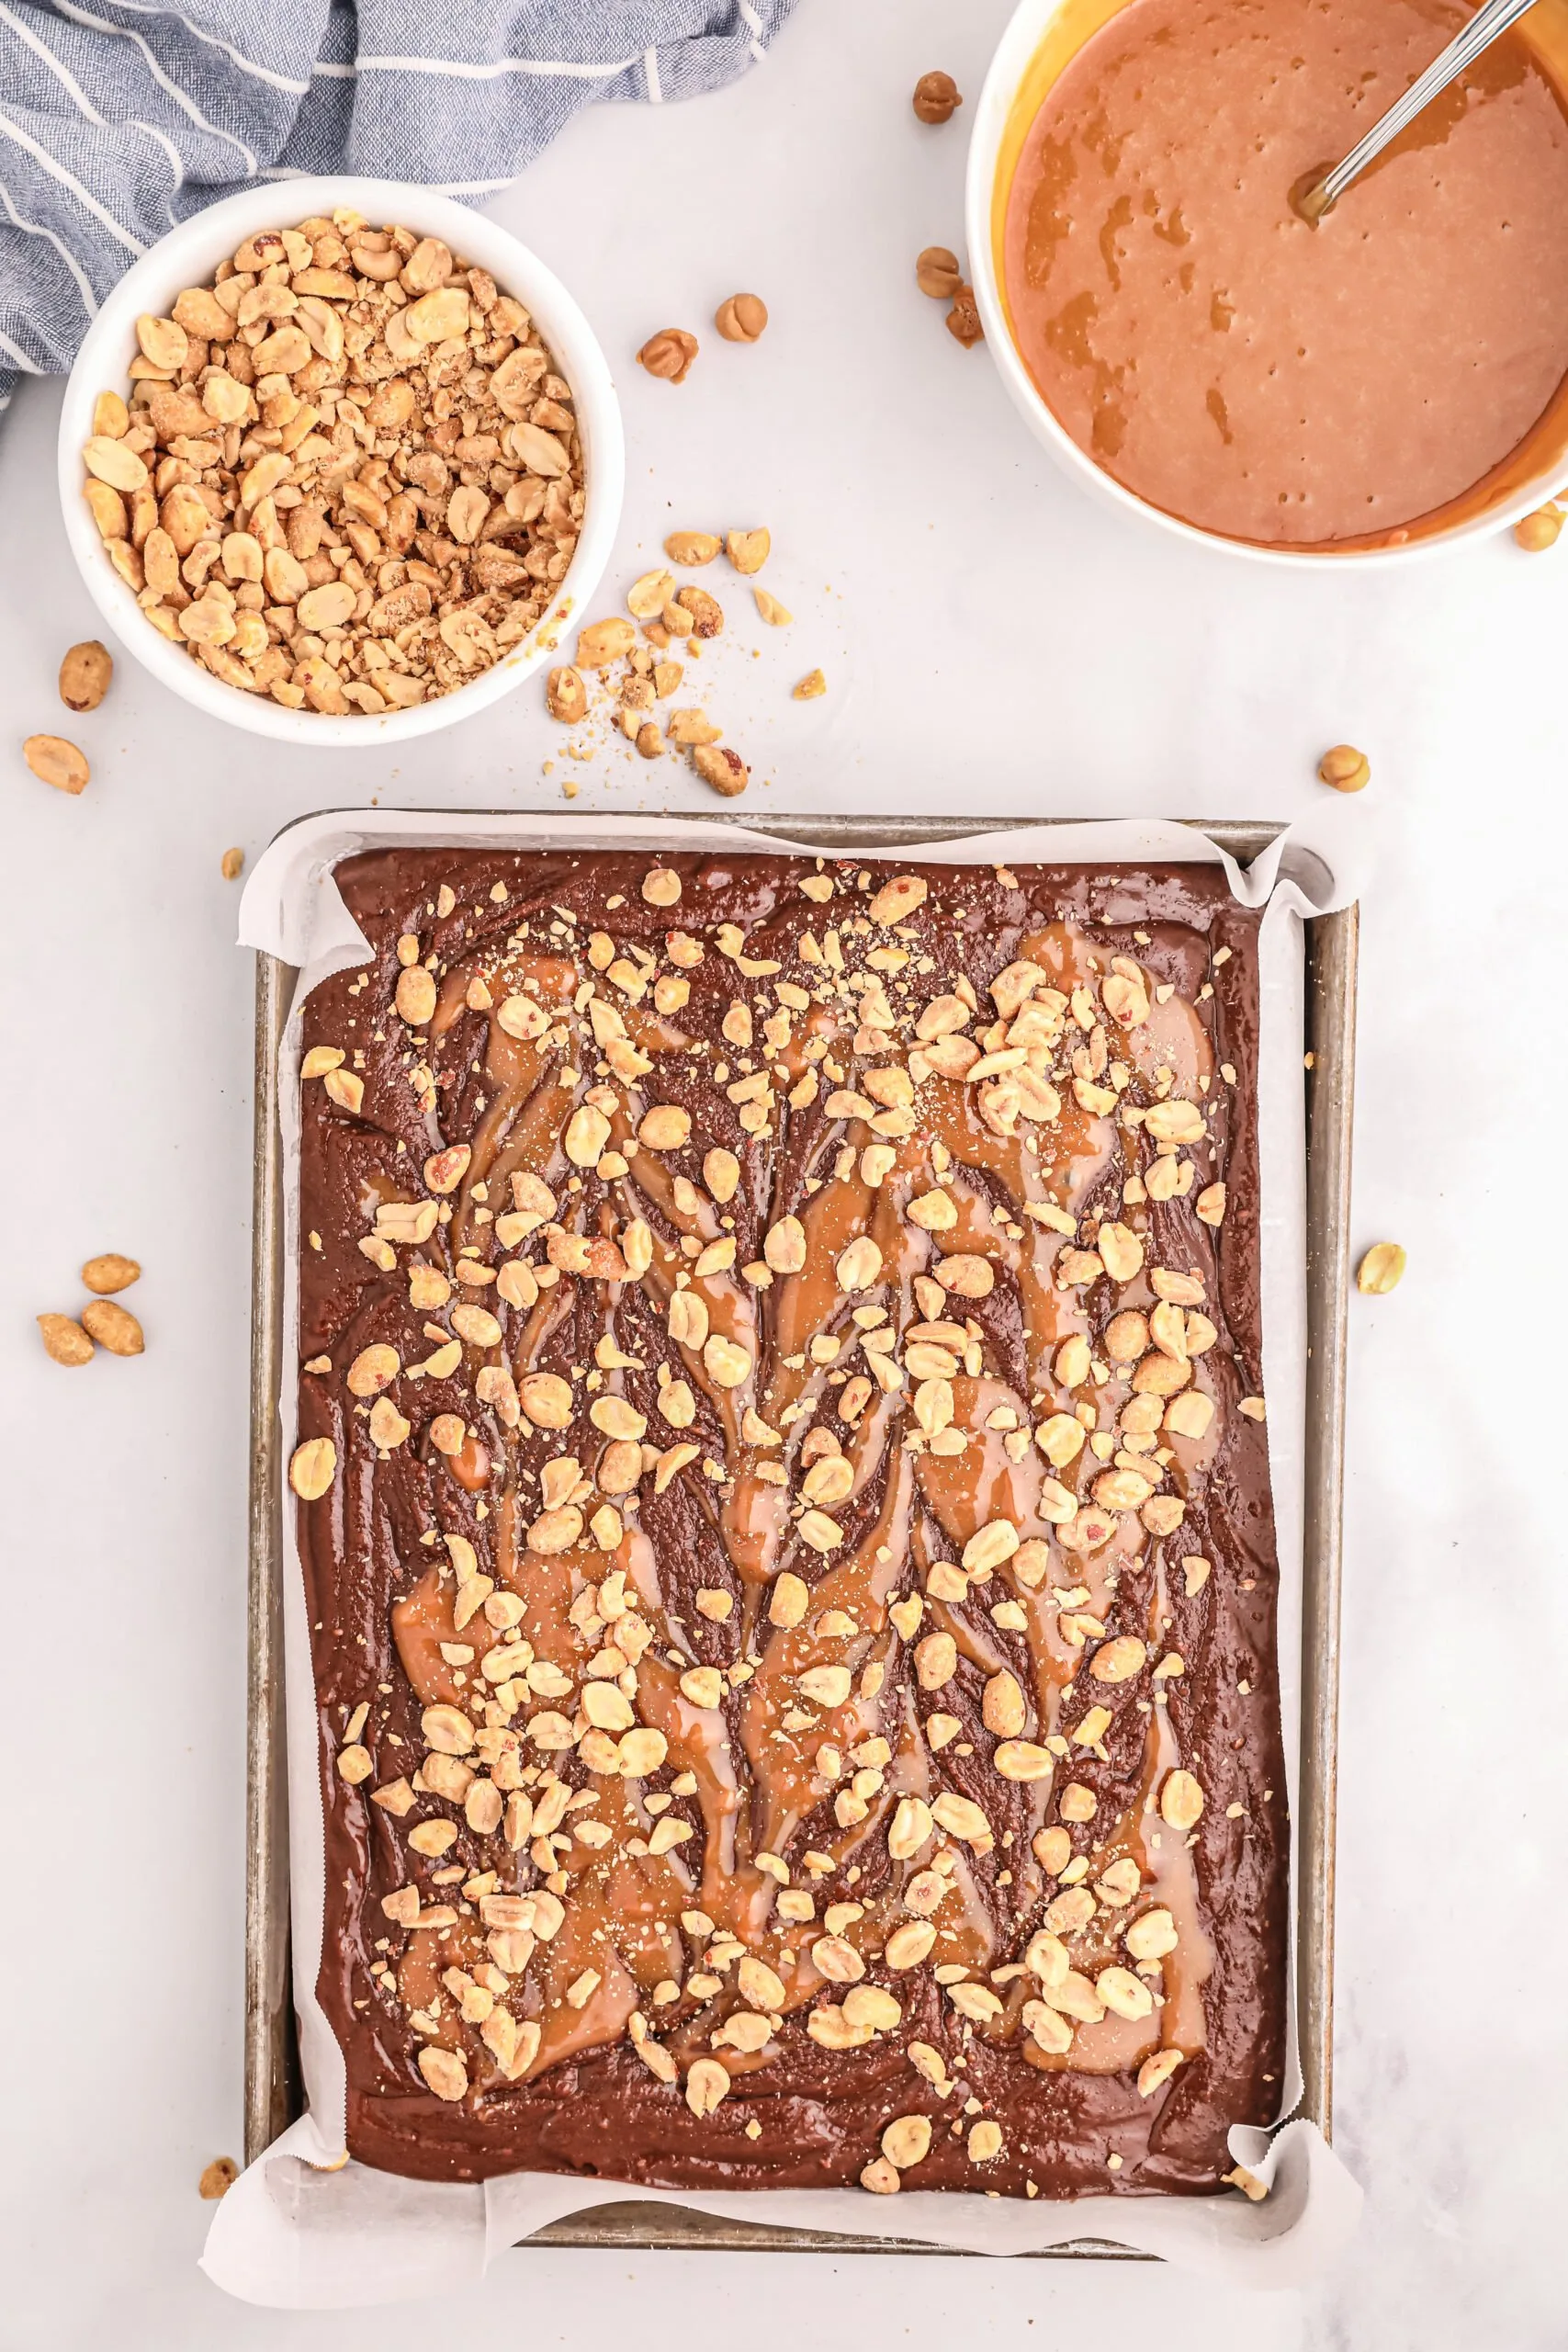 caramel swirl and peanuts topping a brownie batter in a sheet pan